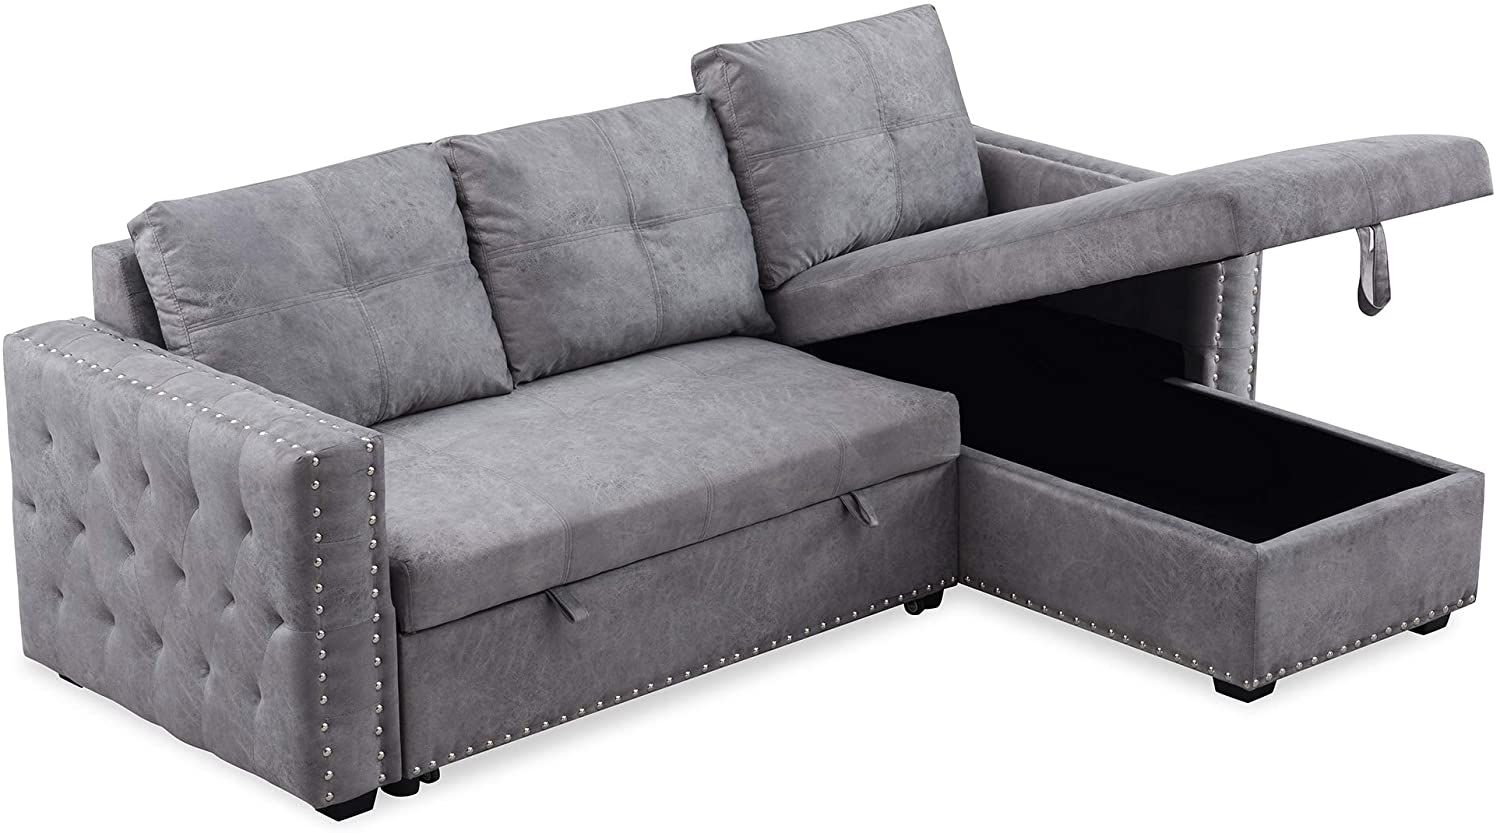 Wholesale 91" Reversible Sleeper Sectional Sofa 3 Seat With Nail Head For 3 Seat Convertible Sectional Sofas (View 18 of 20)